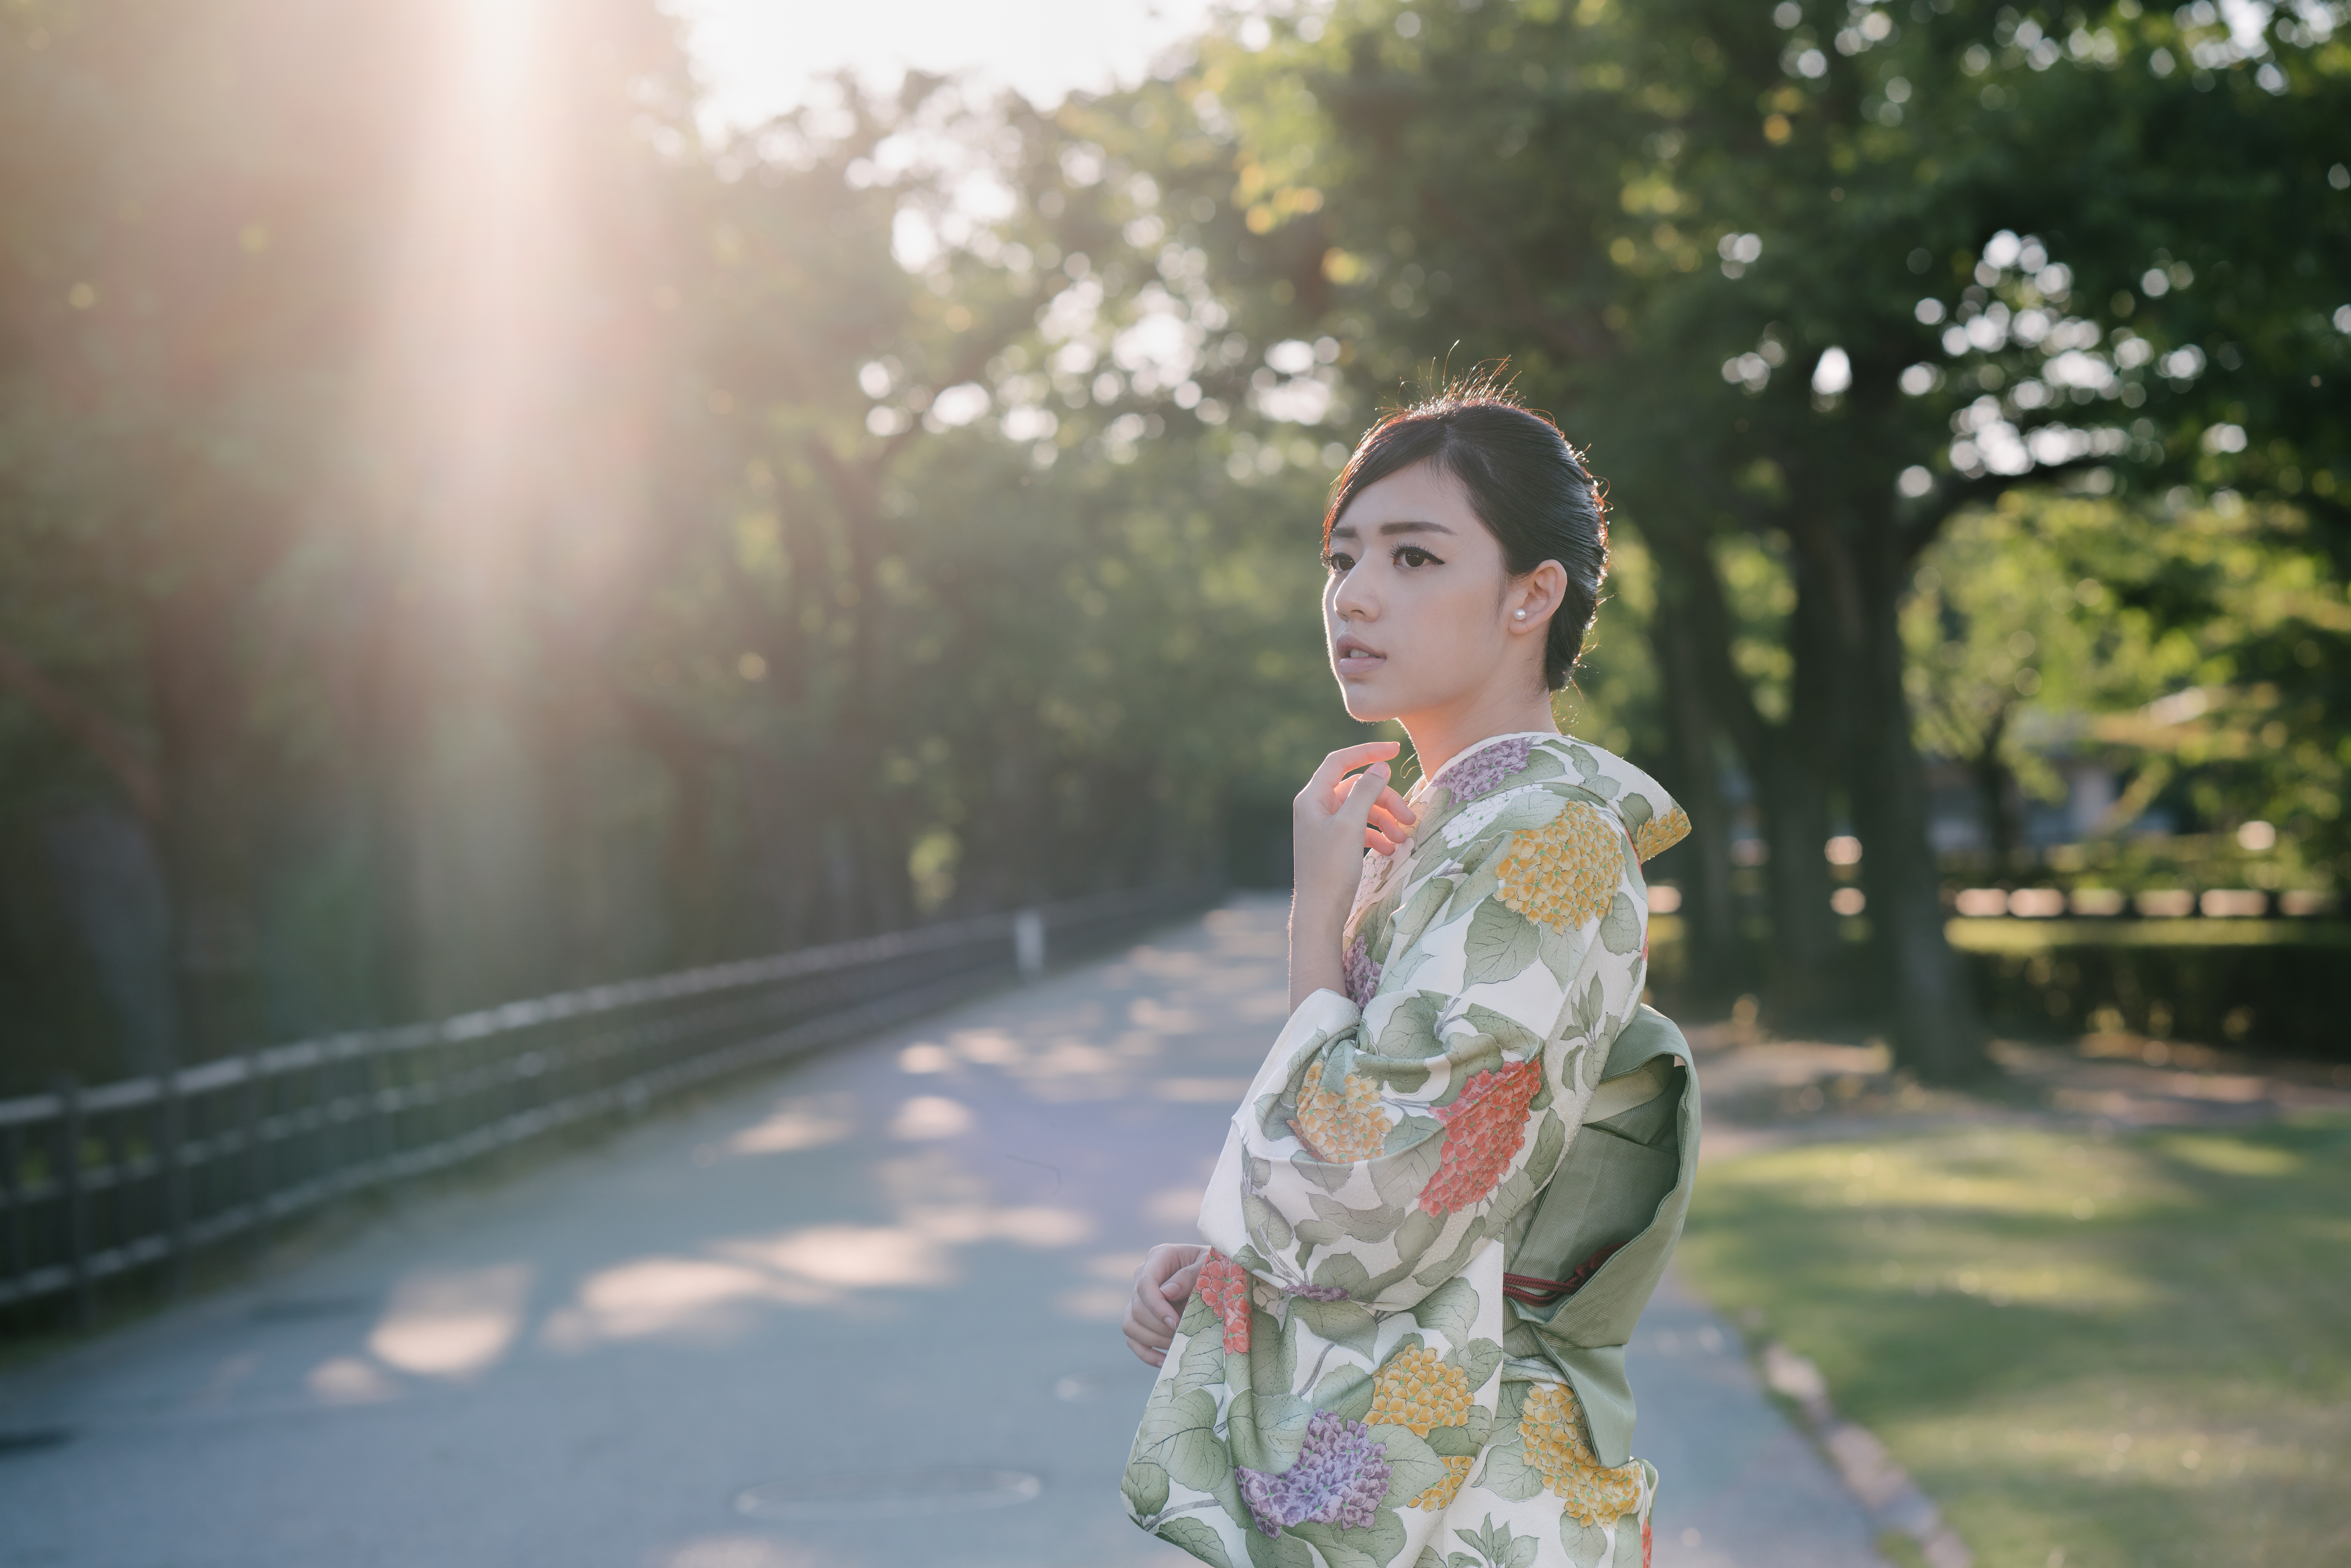 Model Women Brunette Asian Traditional Clothing Looking Away Glare Park Trees Women Outdoors 5616x3746